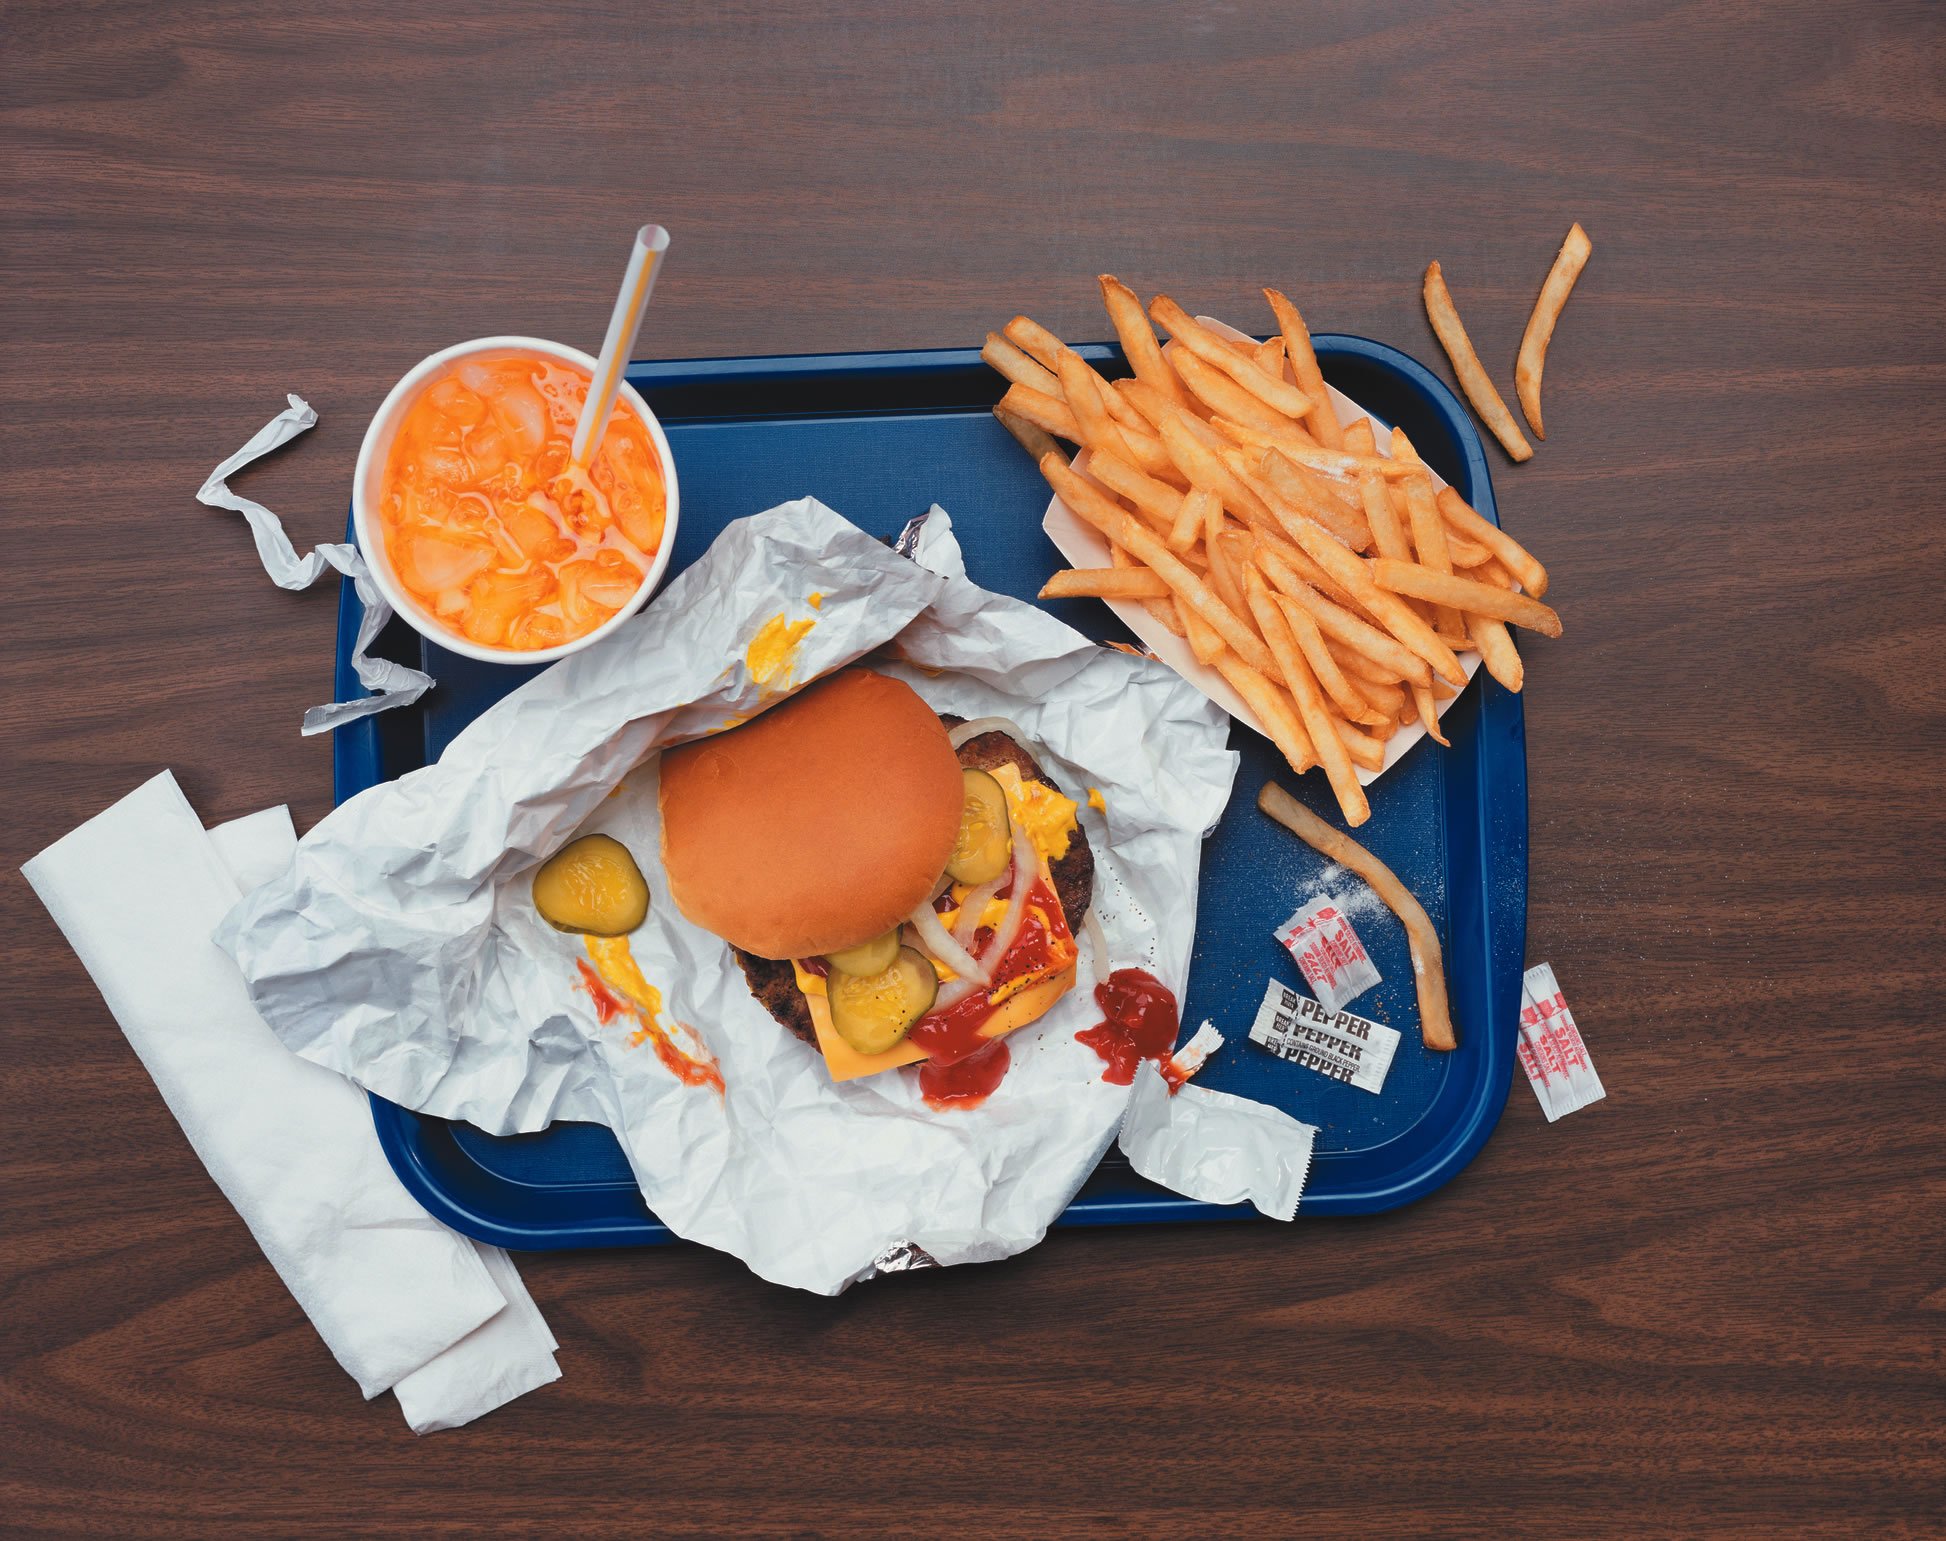 Healthy Fast Food Choices? Tufts Health & Nutrition Letter